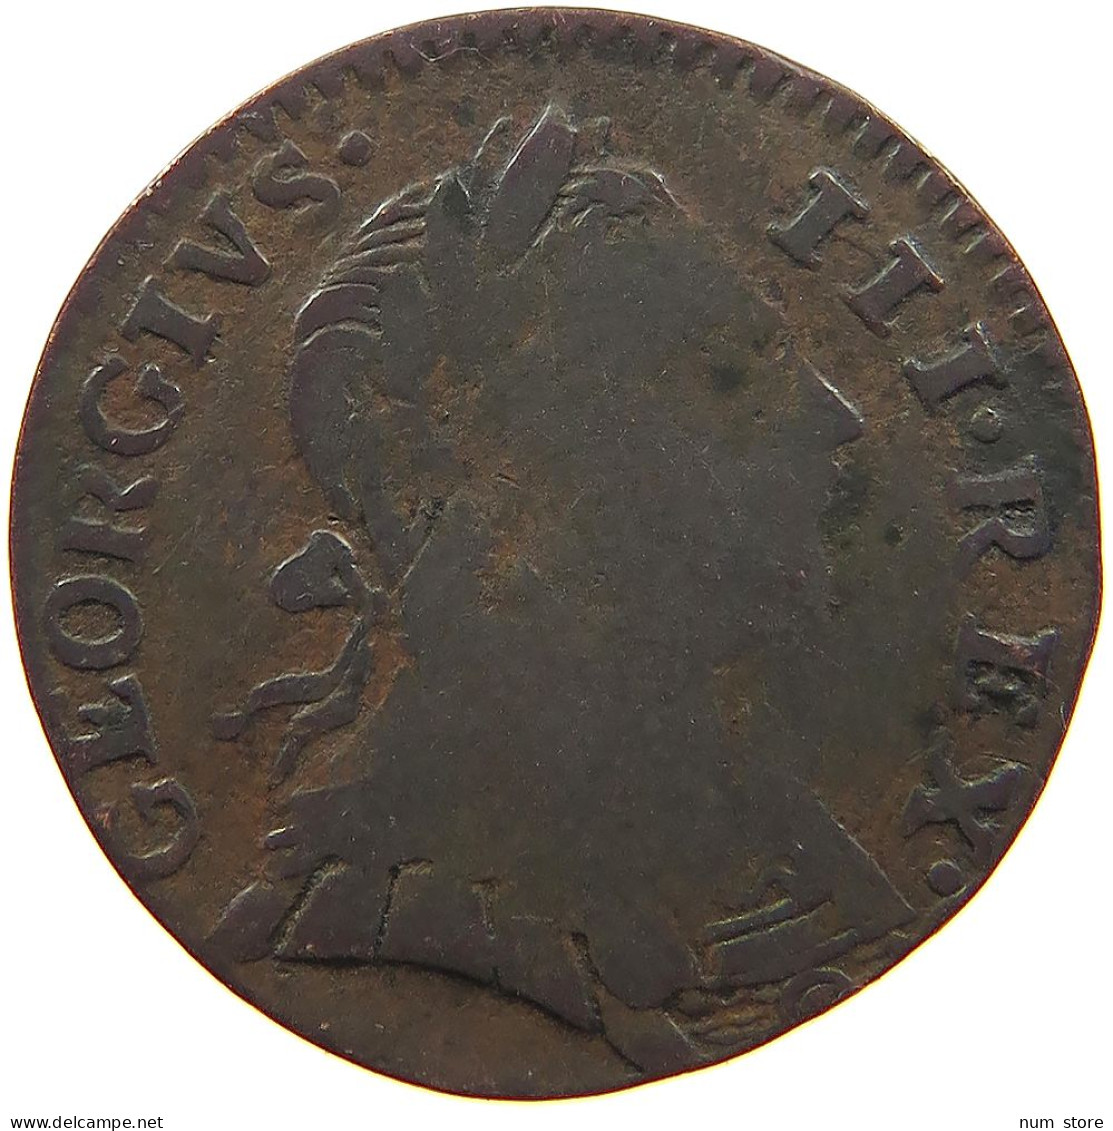 GREAT BRITAIN FARTHING 1775 Georg III. 1760-1820 CONTEMPORARY IMITATION #t018 0137 - A. 1 Farthing